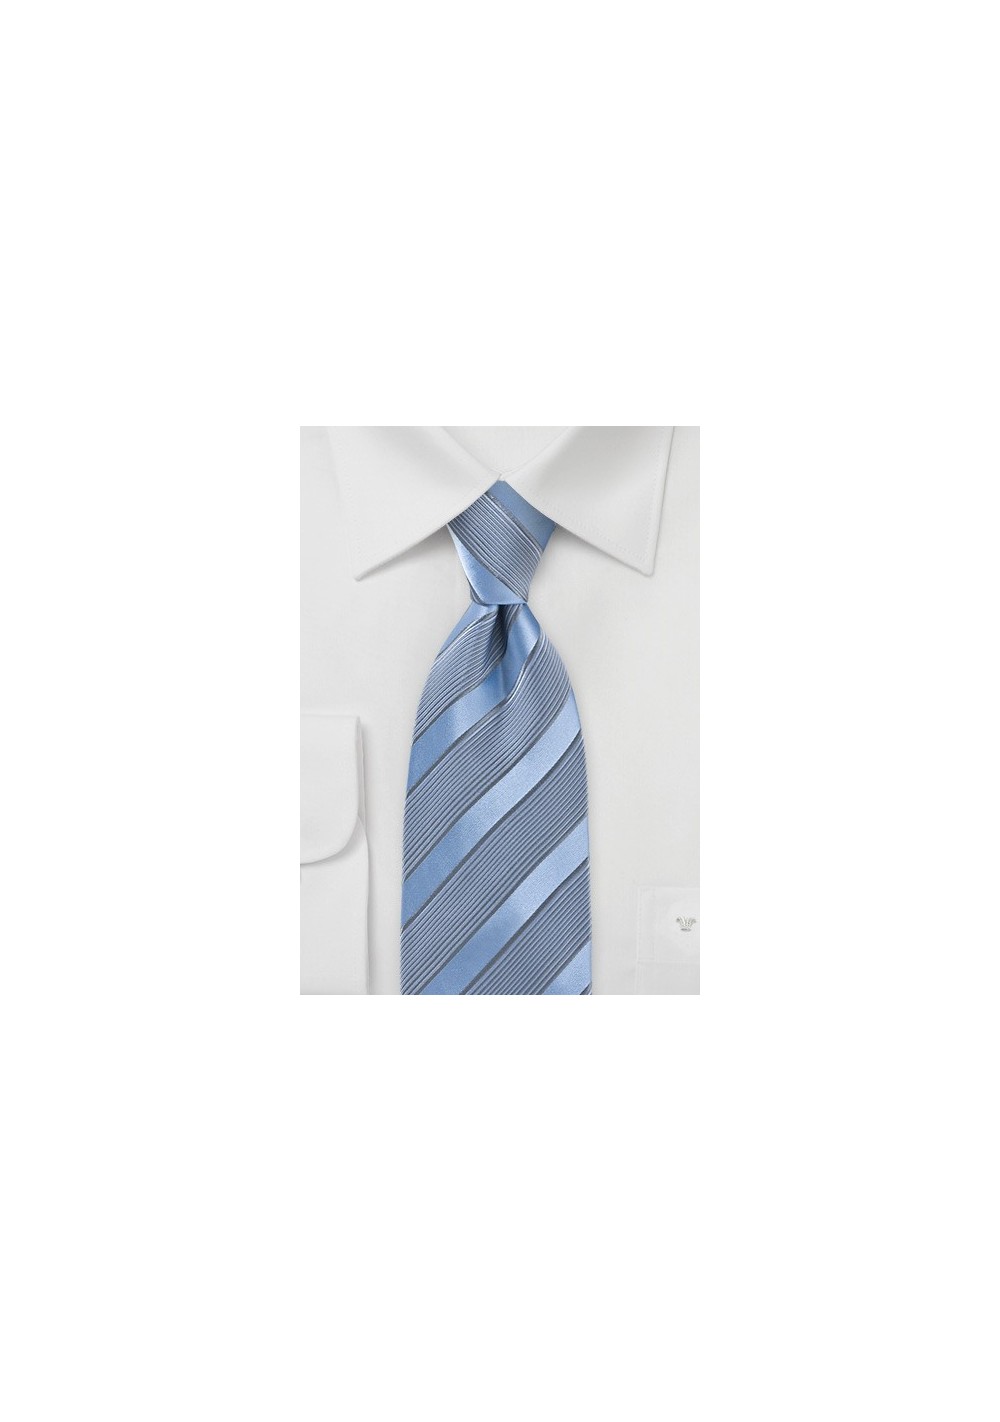 Periwinkle Tie with Silver Stripes